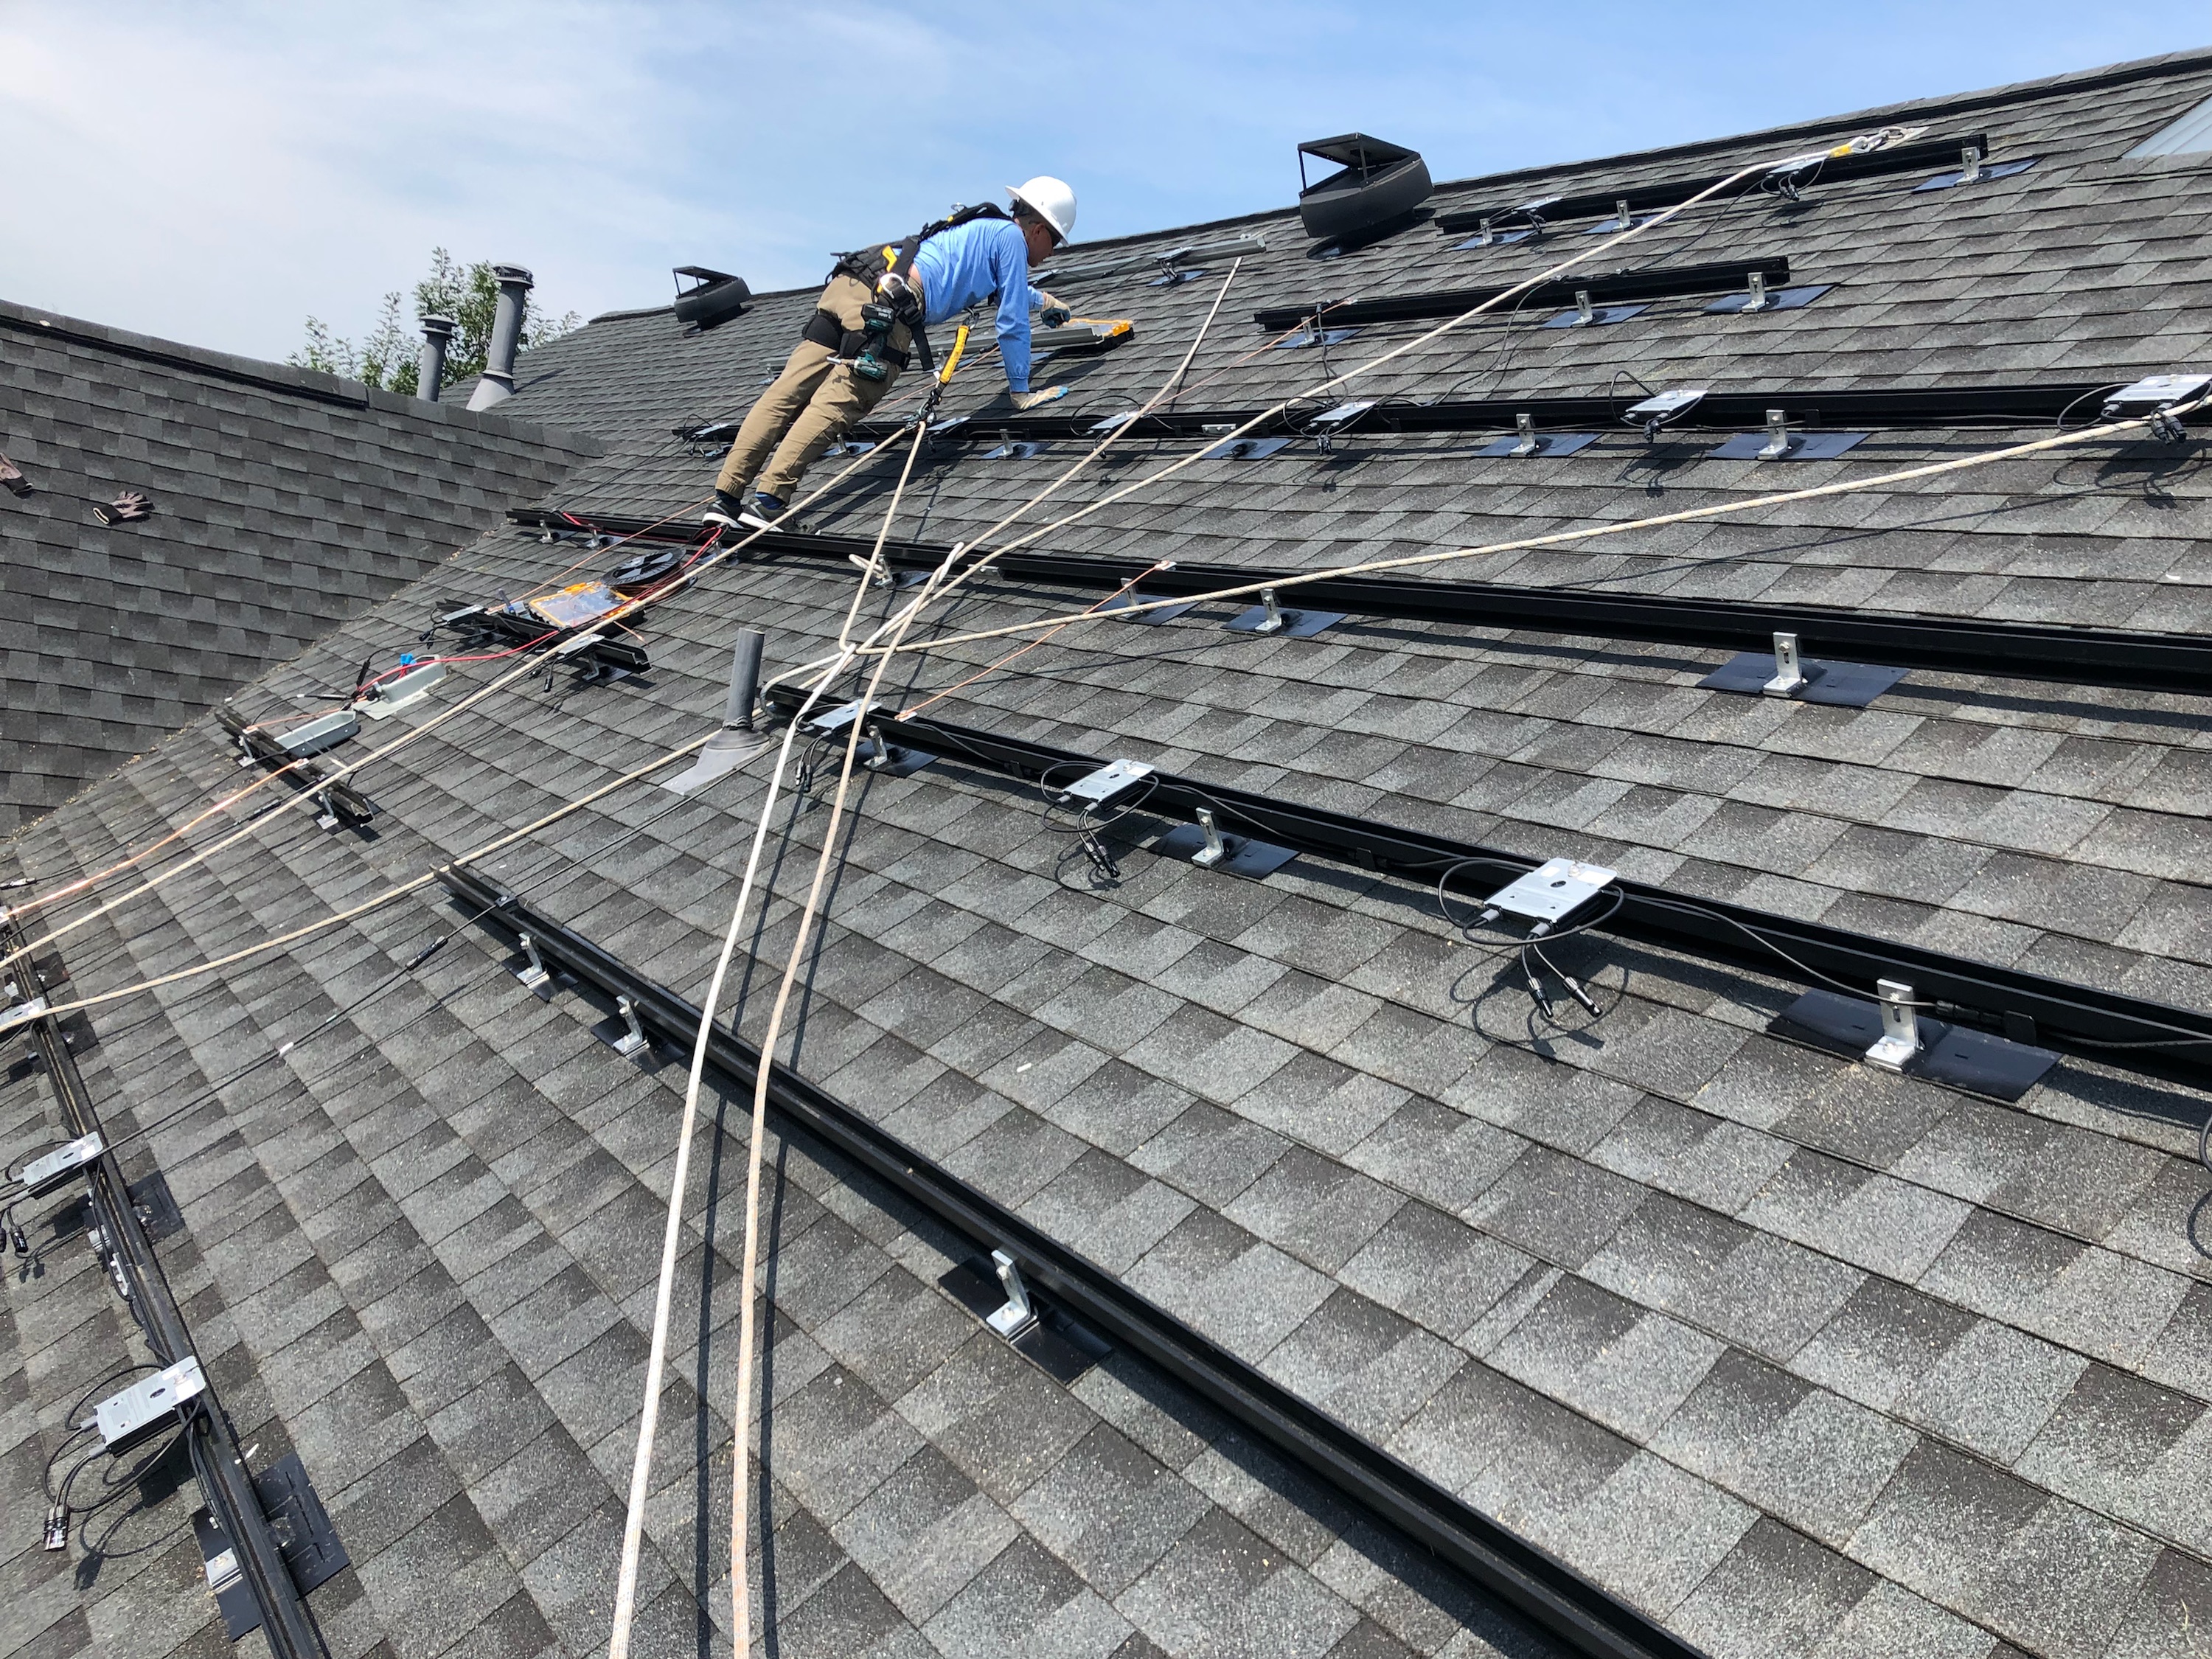 Installing solar panels on a home